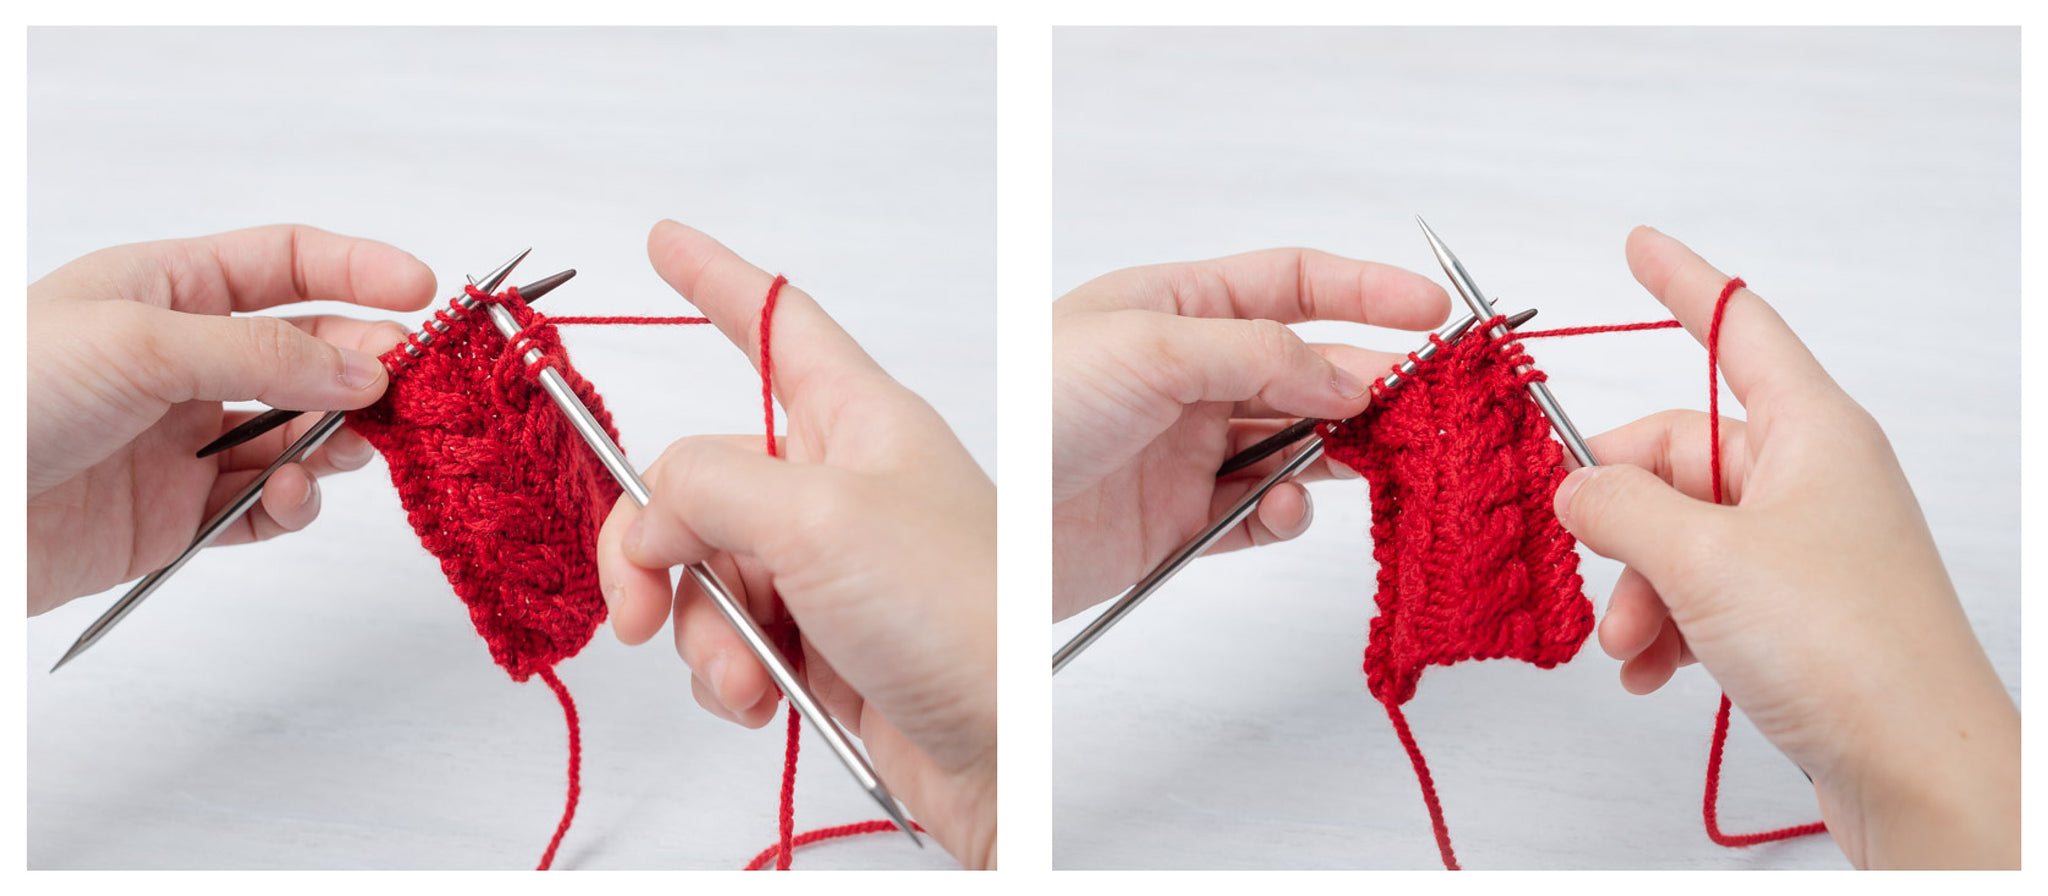 How to Knit the Cable Stitch Without a Cable Needle - KnotEnufKnitting